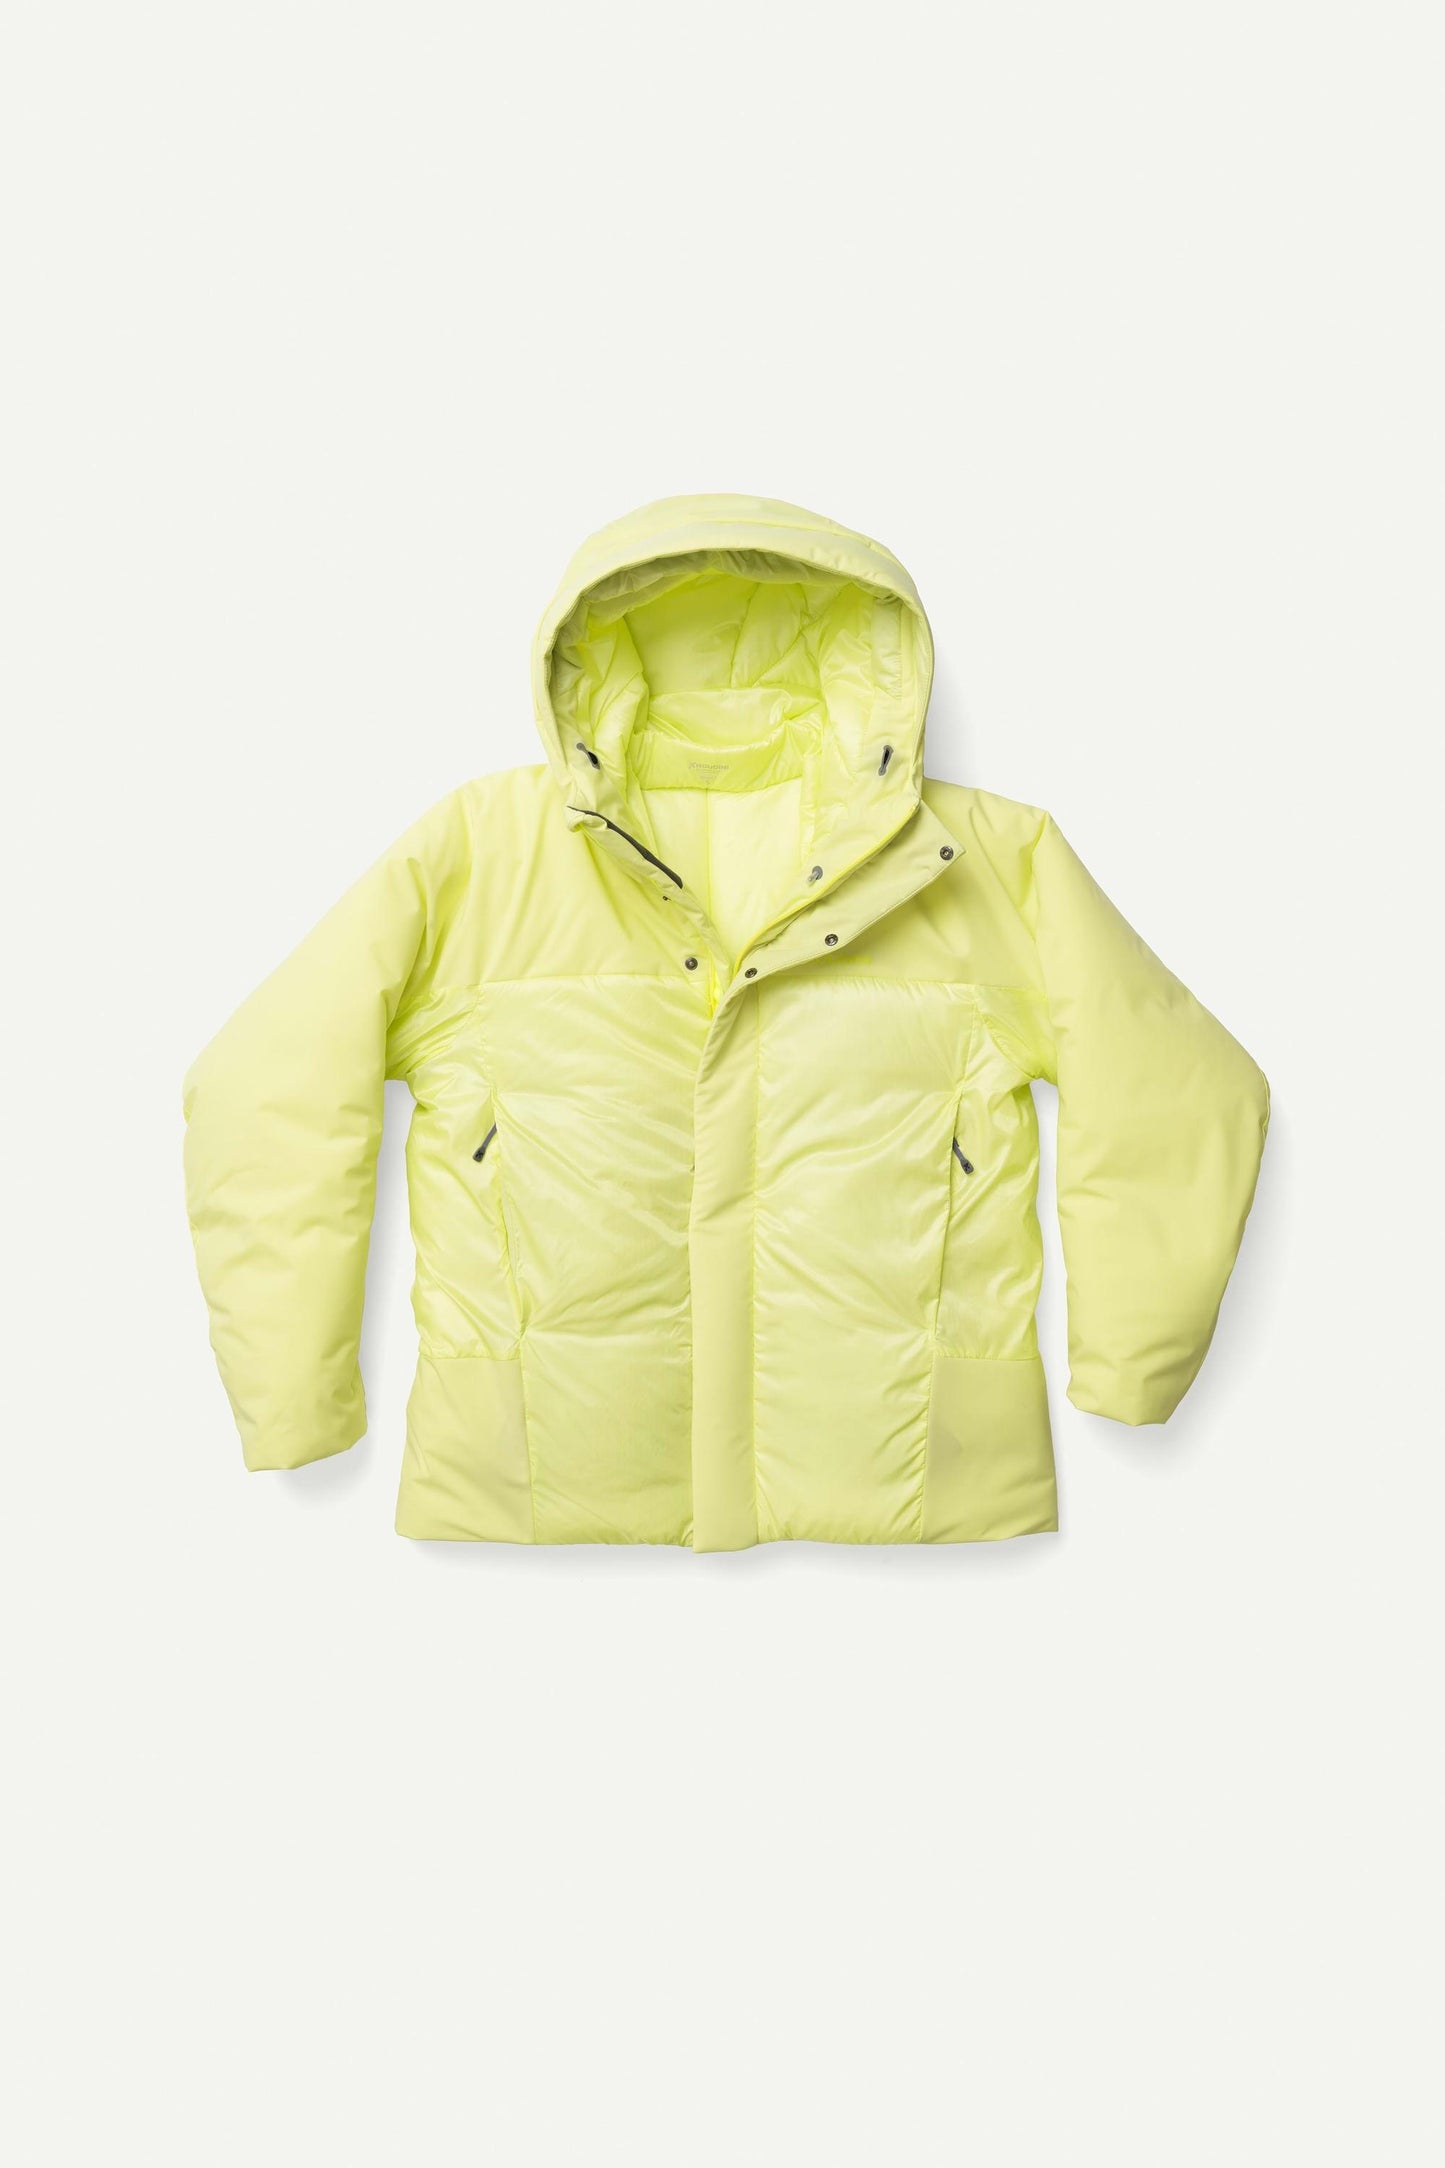 Ws-Bouncer-Jacket_Post-It-Yellow_100244_A79_FLAT_C_low